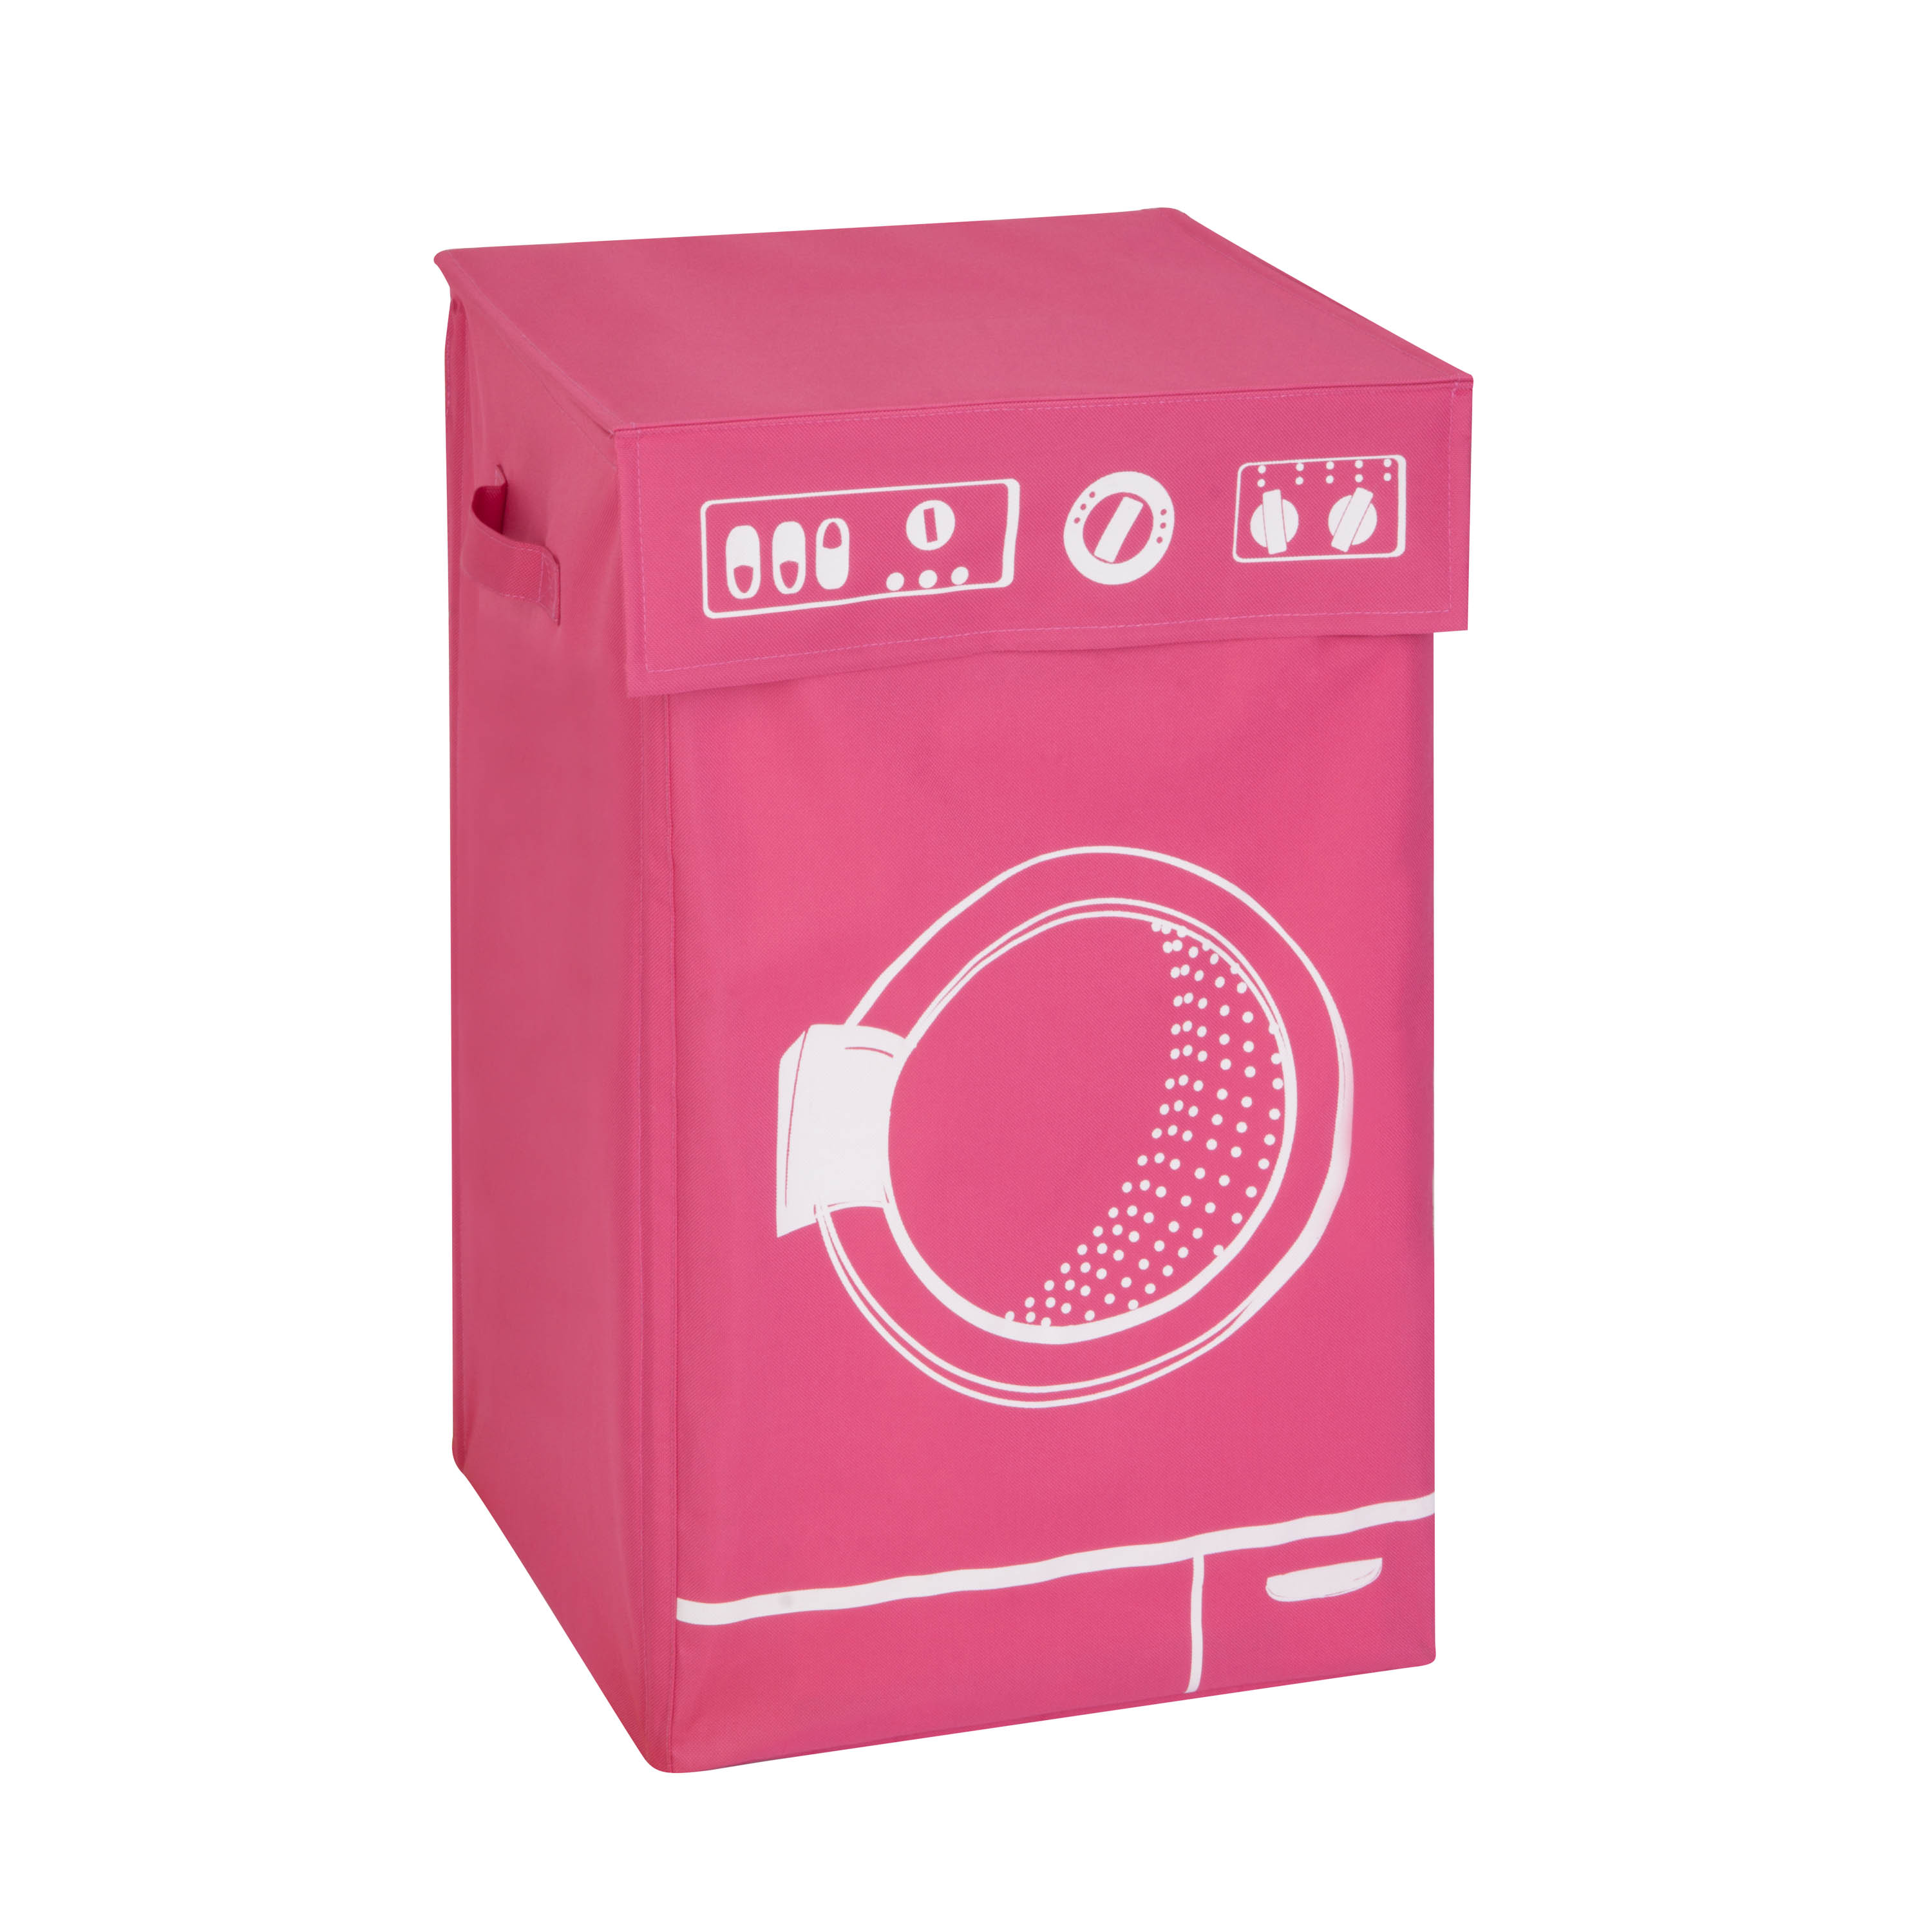 Honey Can Do Washing Graphic Hamper, Pink - image 1 of 2